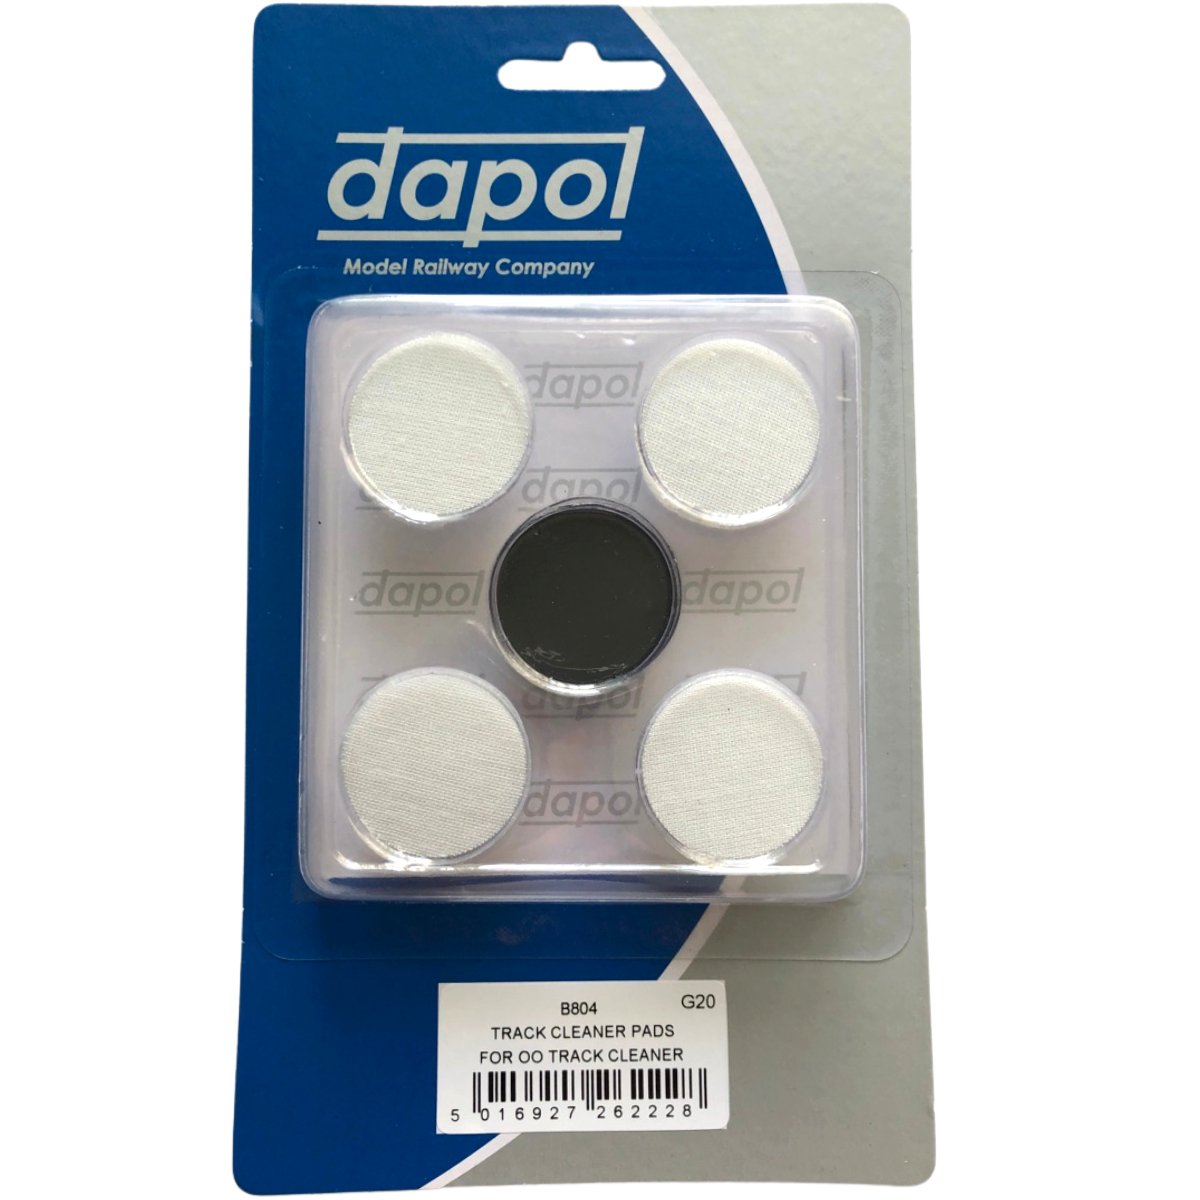 Dapol B804 Spare Cleaning & Polishing Pads for Track Cleaner (OO Gauge) - Phillips Hobbies